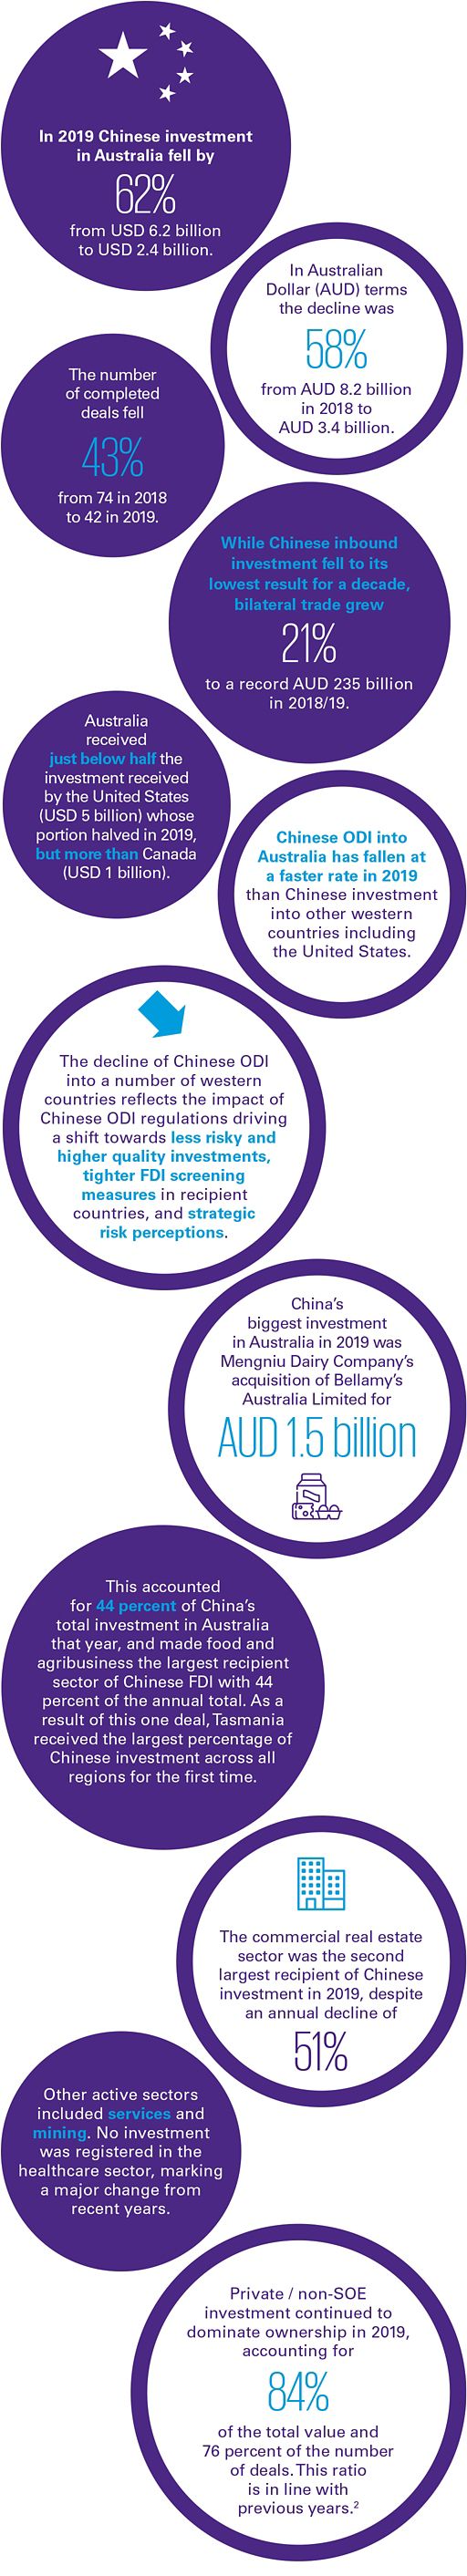 Chinese Investment in Australia June 2020 – Key findings